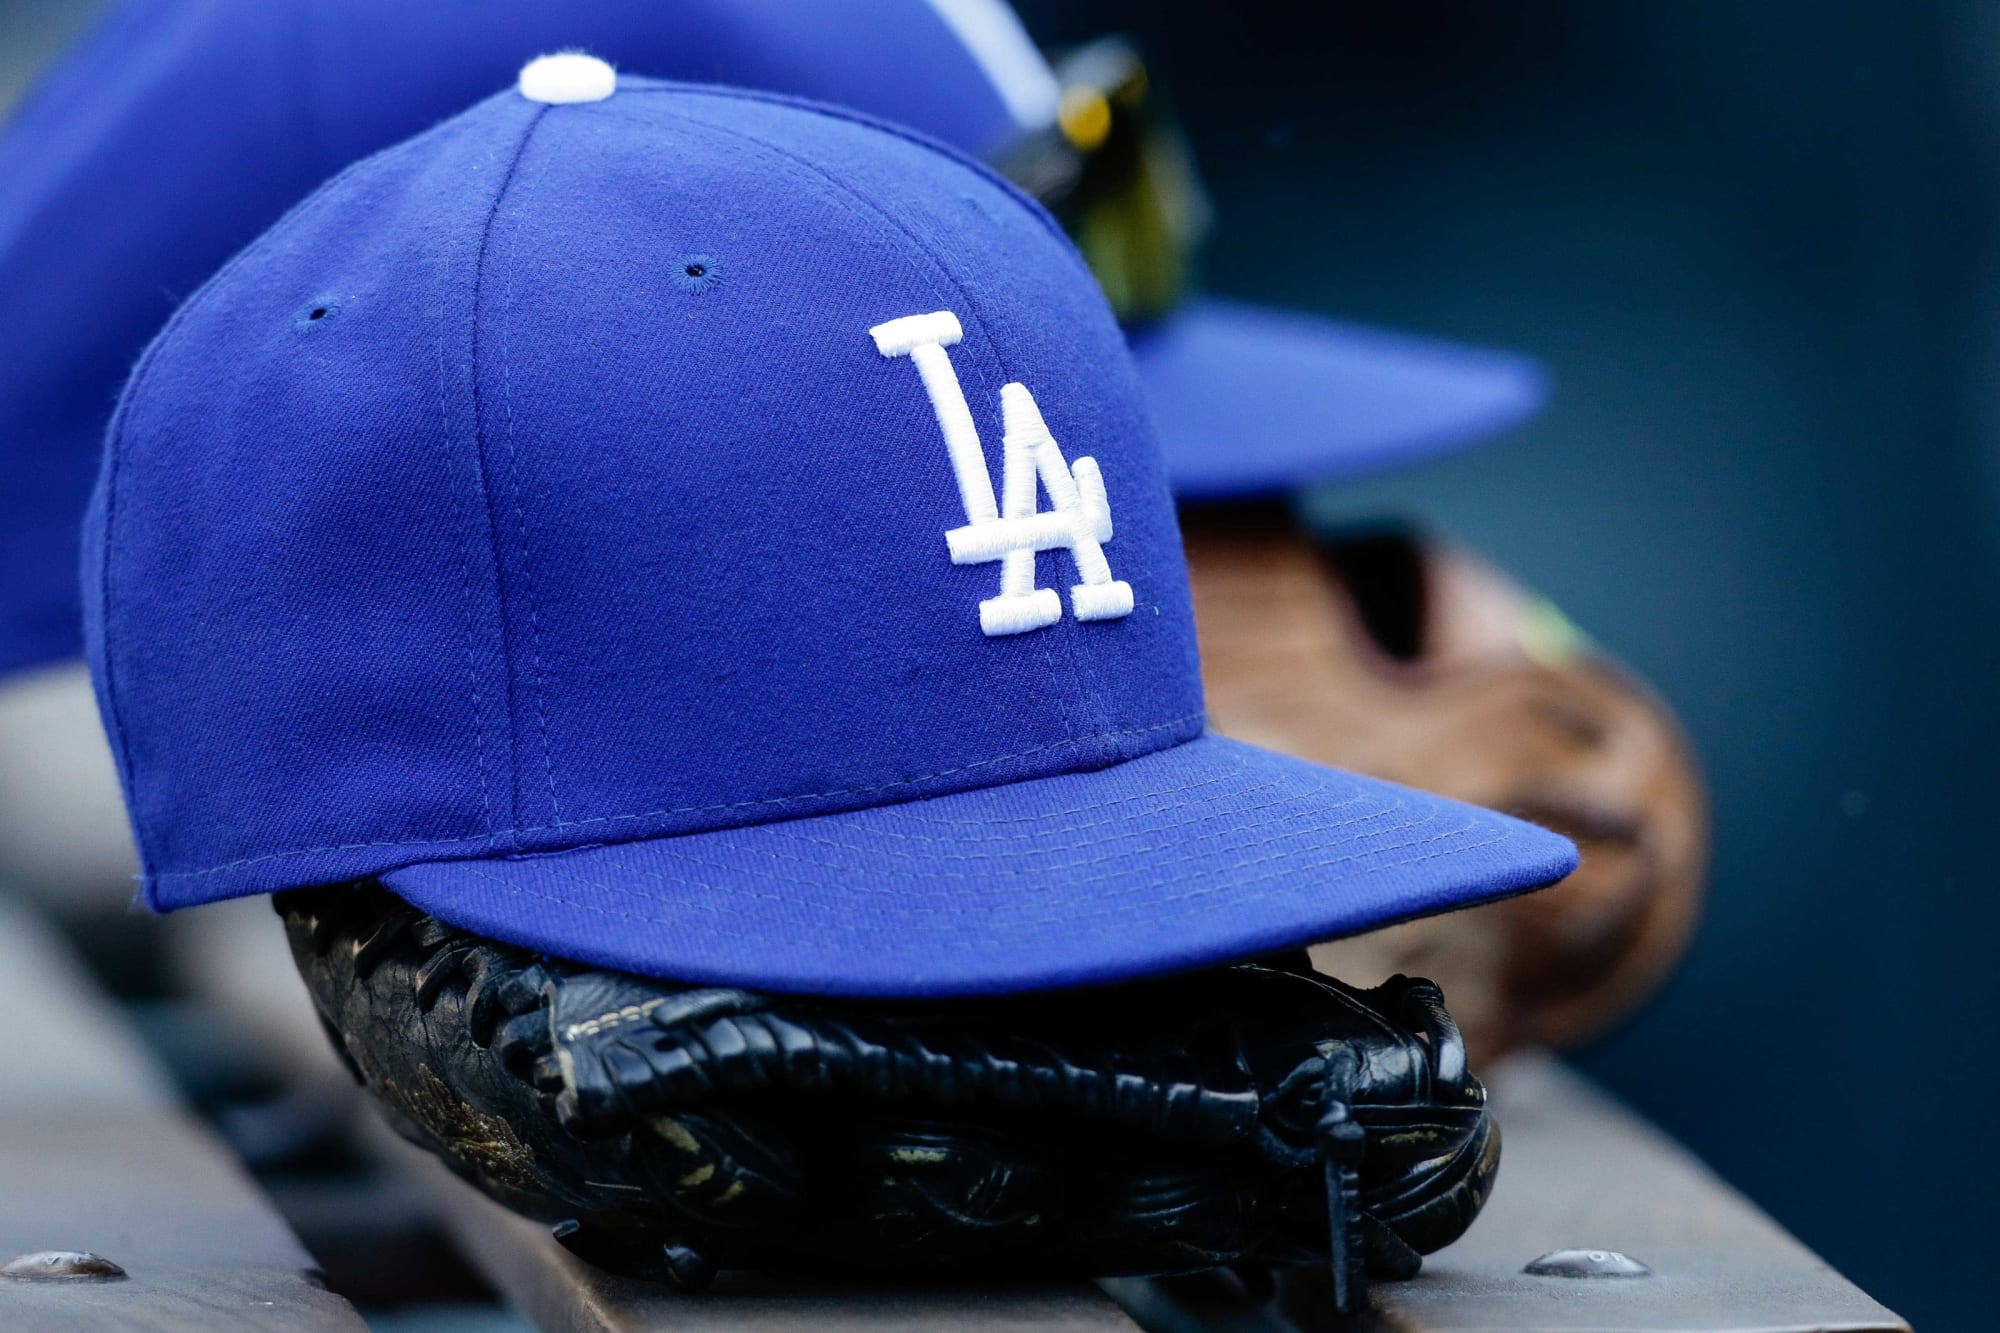 LAFD will be wearing Dodgers hats through the World Series